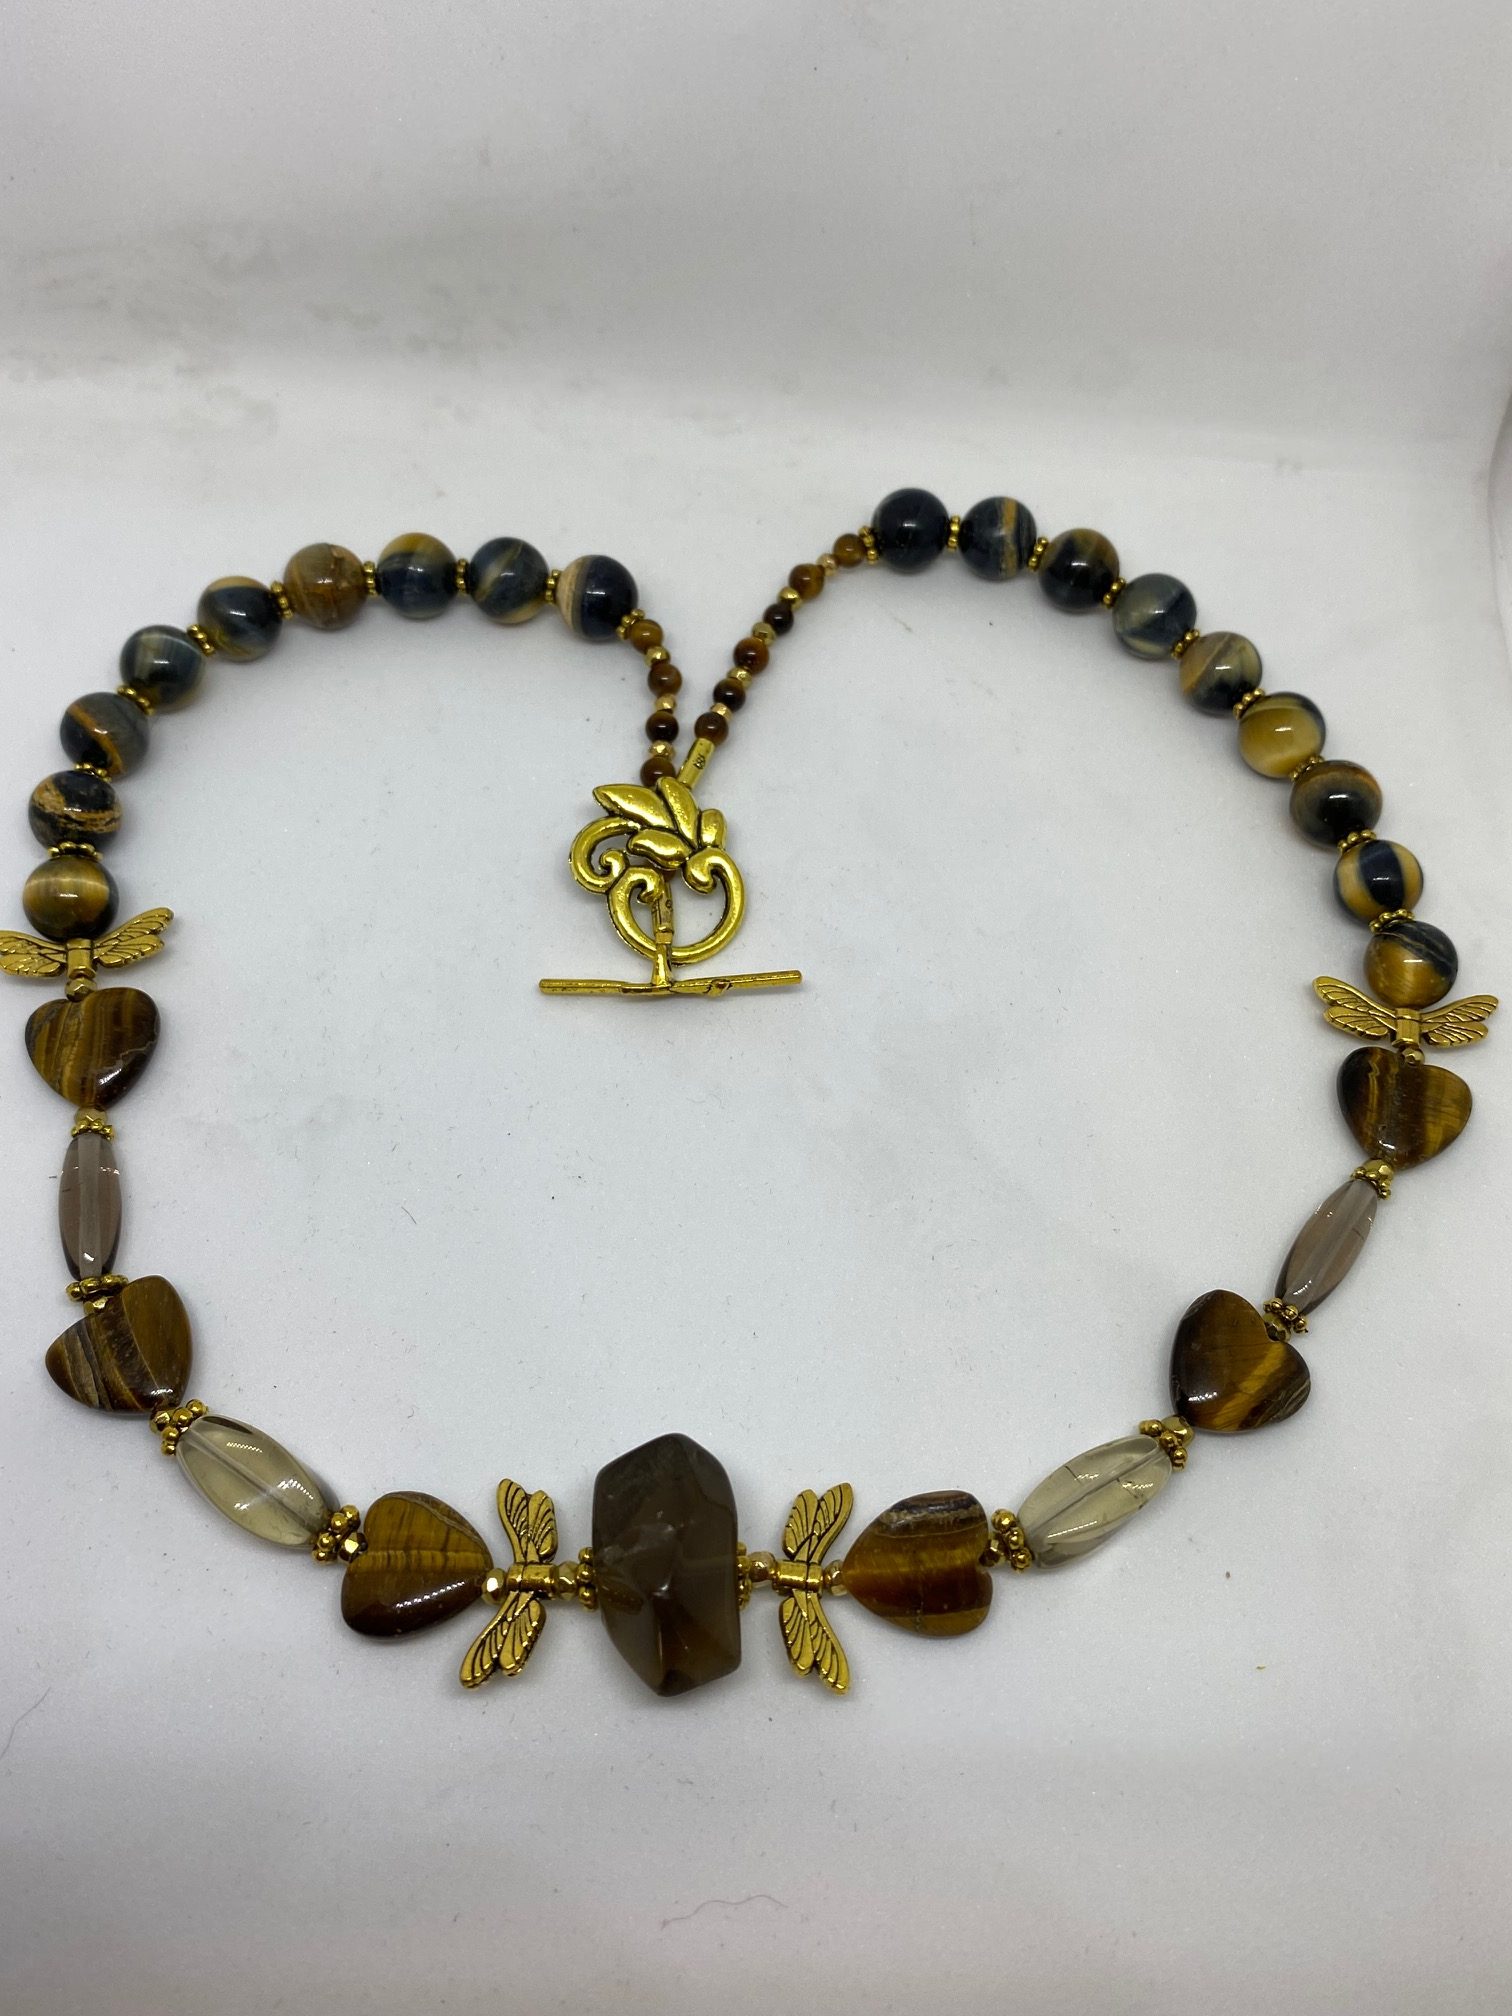 Blue Tiger Eye, Herkimer Diamond, and Jet Necklace. This necklace promotes Grounding, Life Vitality, and Protection. 